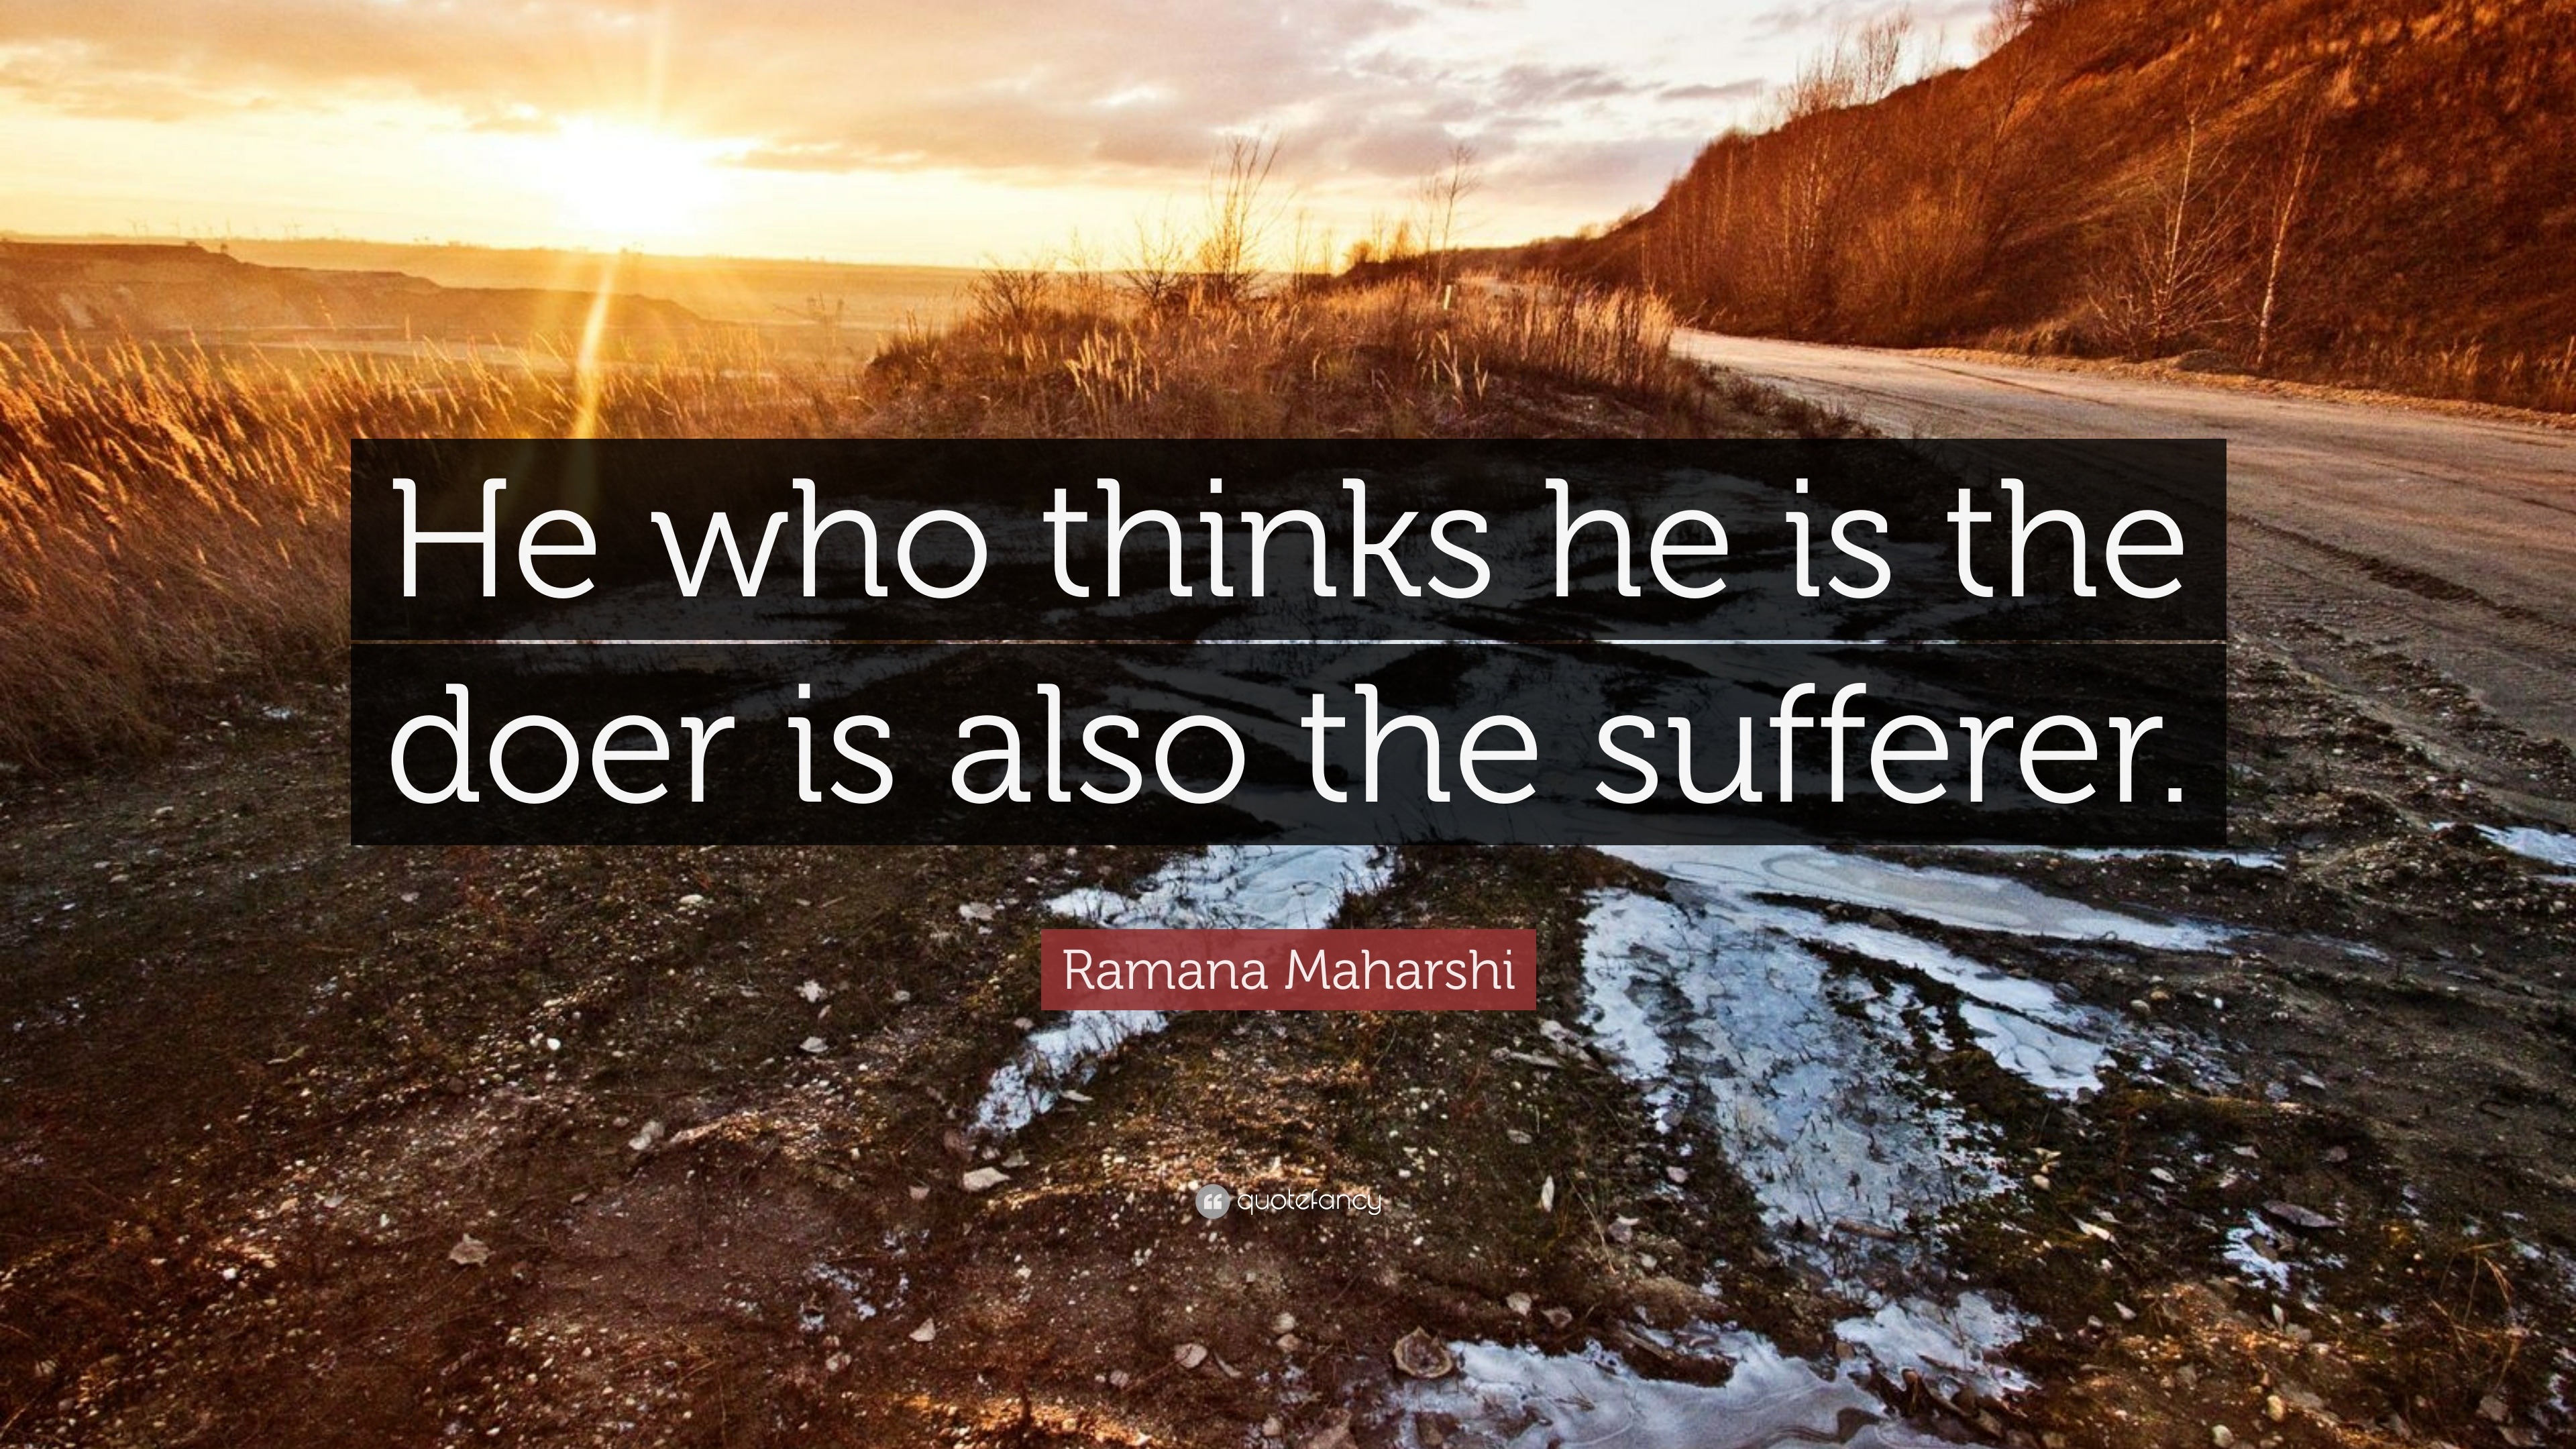 688672 Ramana Maharshi Quote He who thinks he is the doer is also the